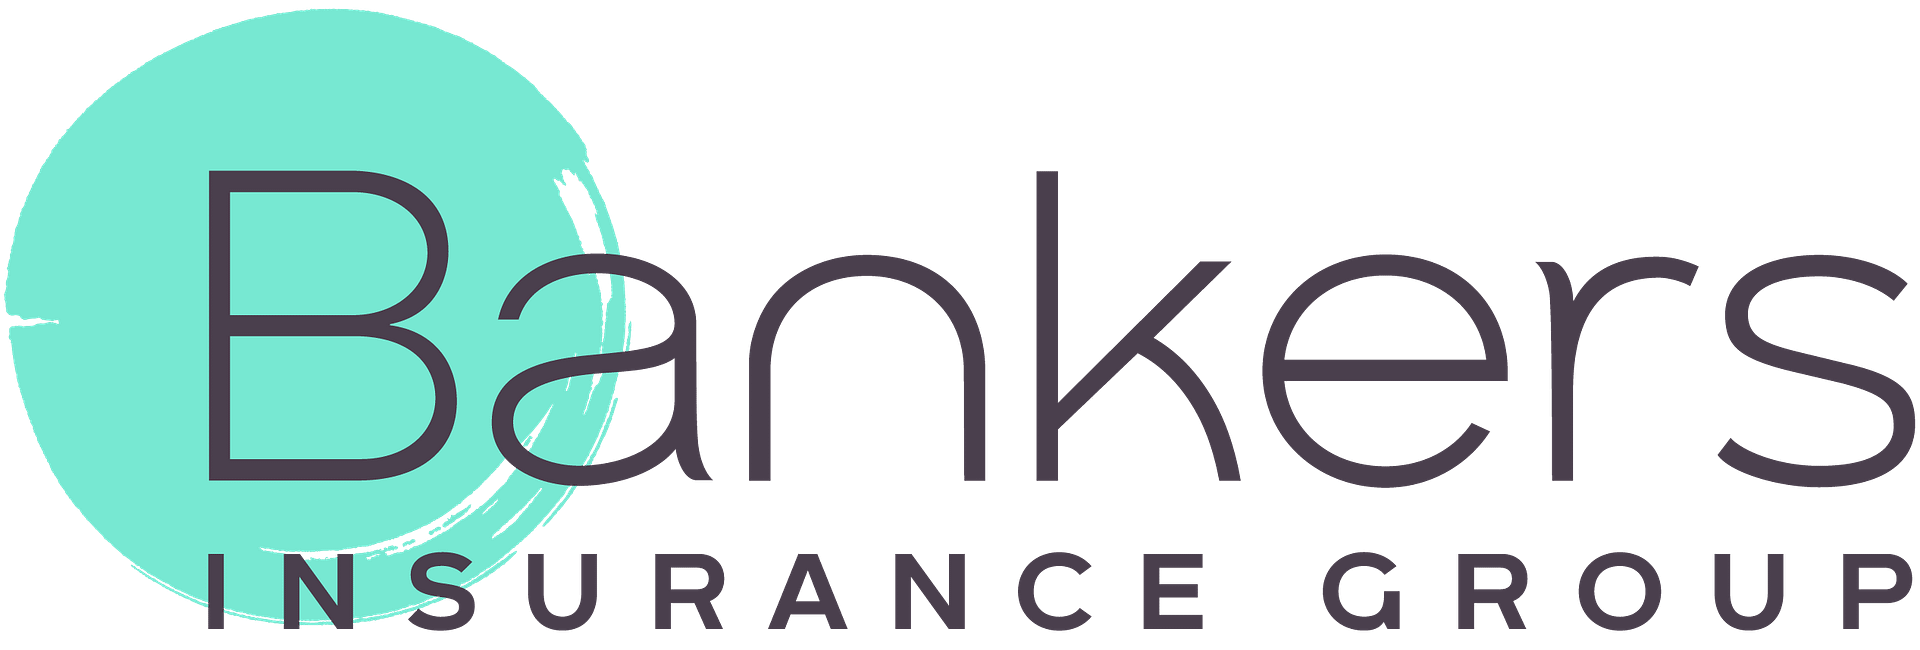 Bankers Insurance Group Logo